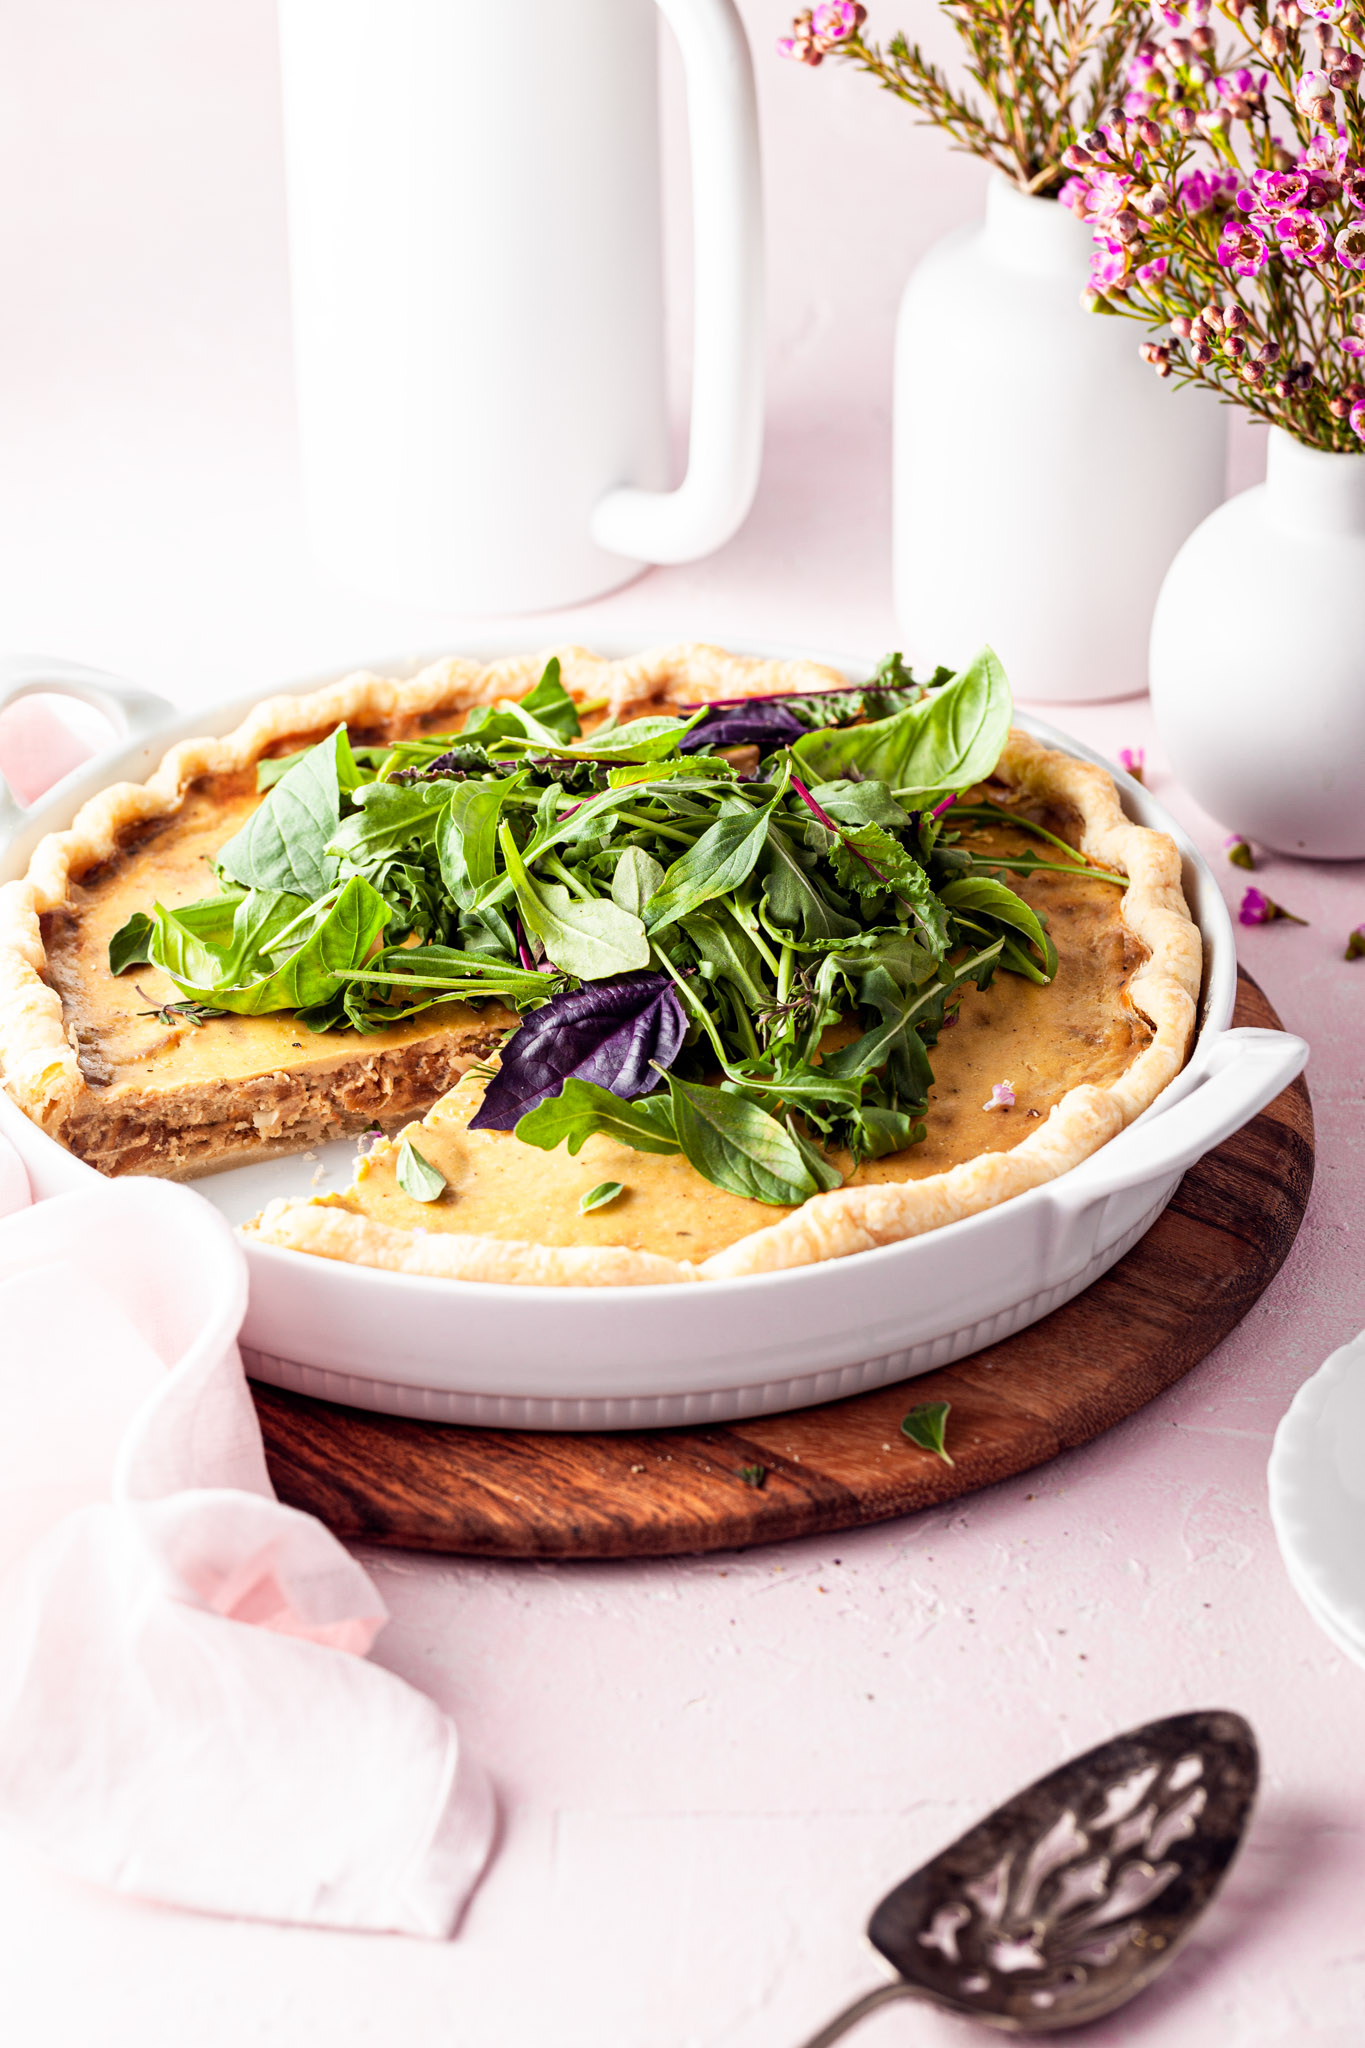 A quiche in a white tart dish with a slice served. White vases are in the background on this brunch table.